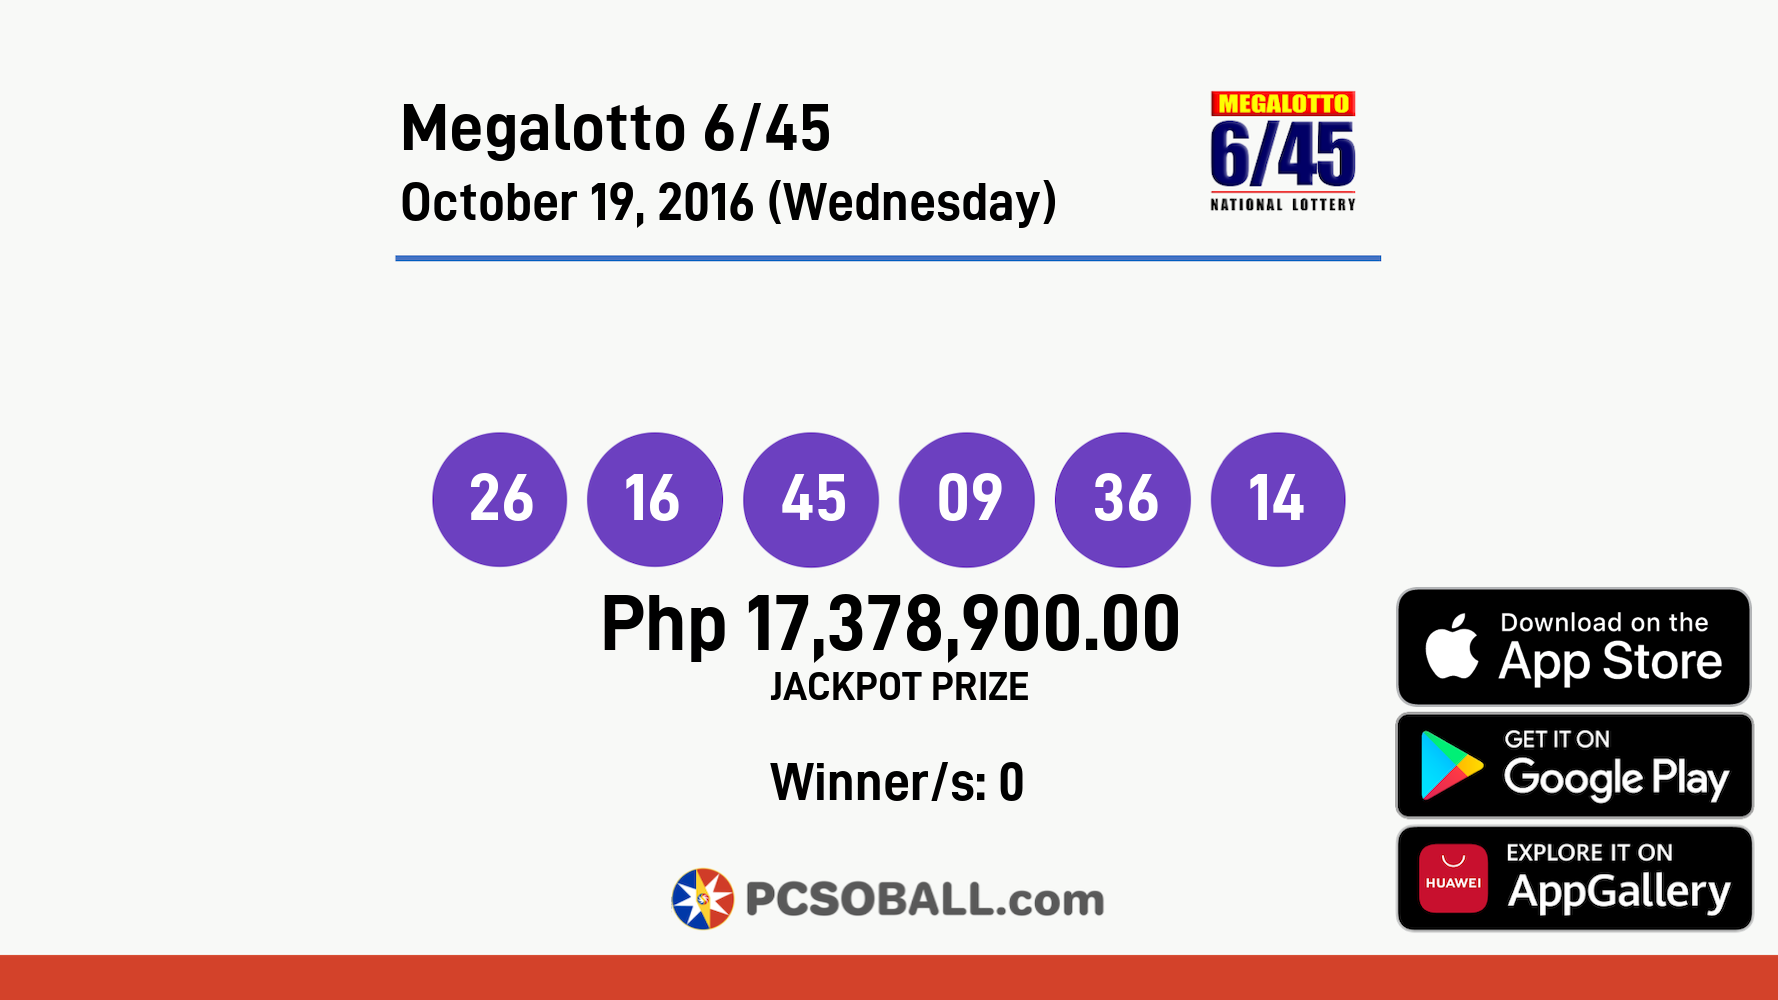 Megalotto 6/45 October 19, 2016 (Wednesday) Result